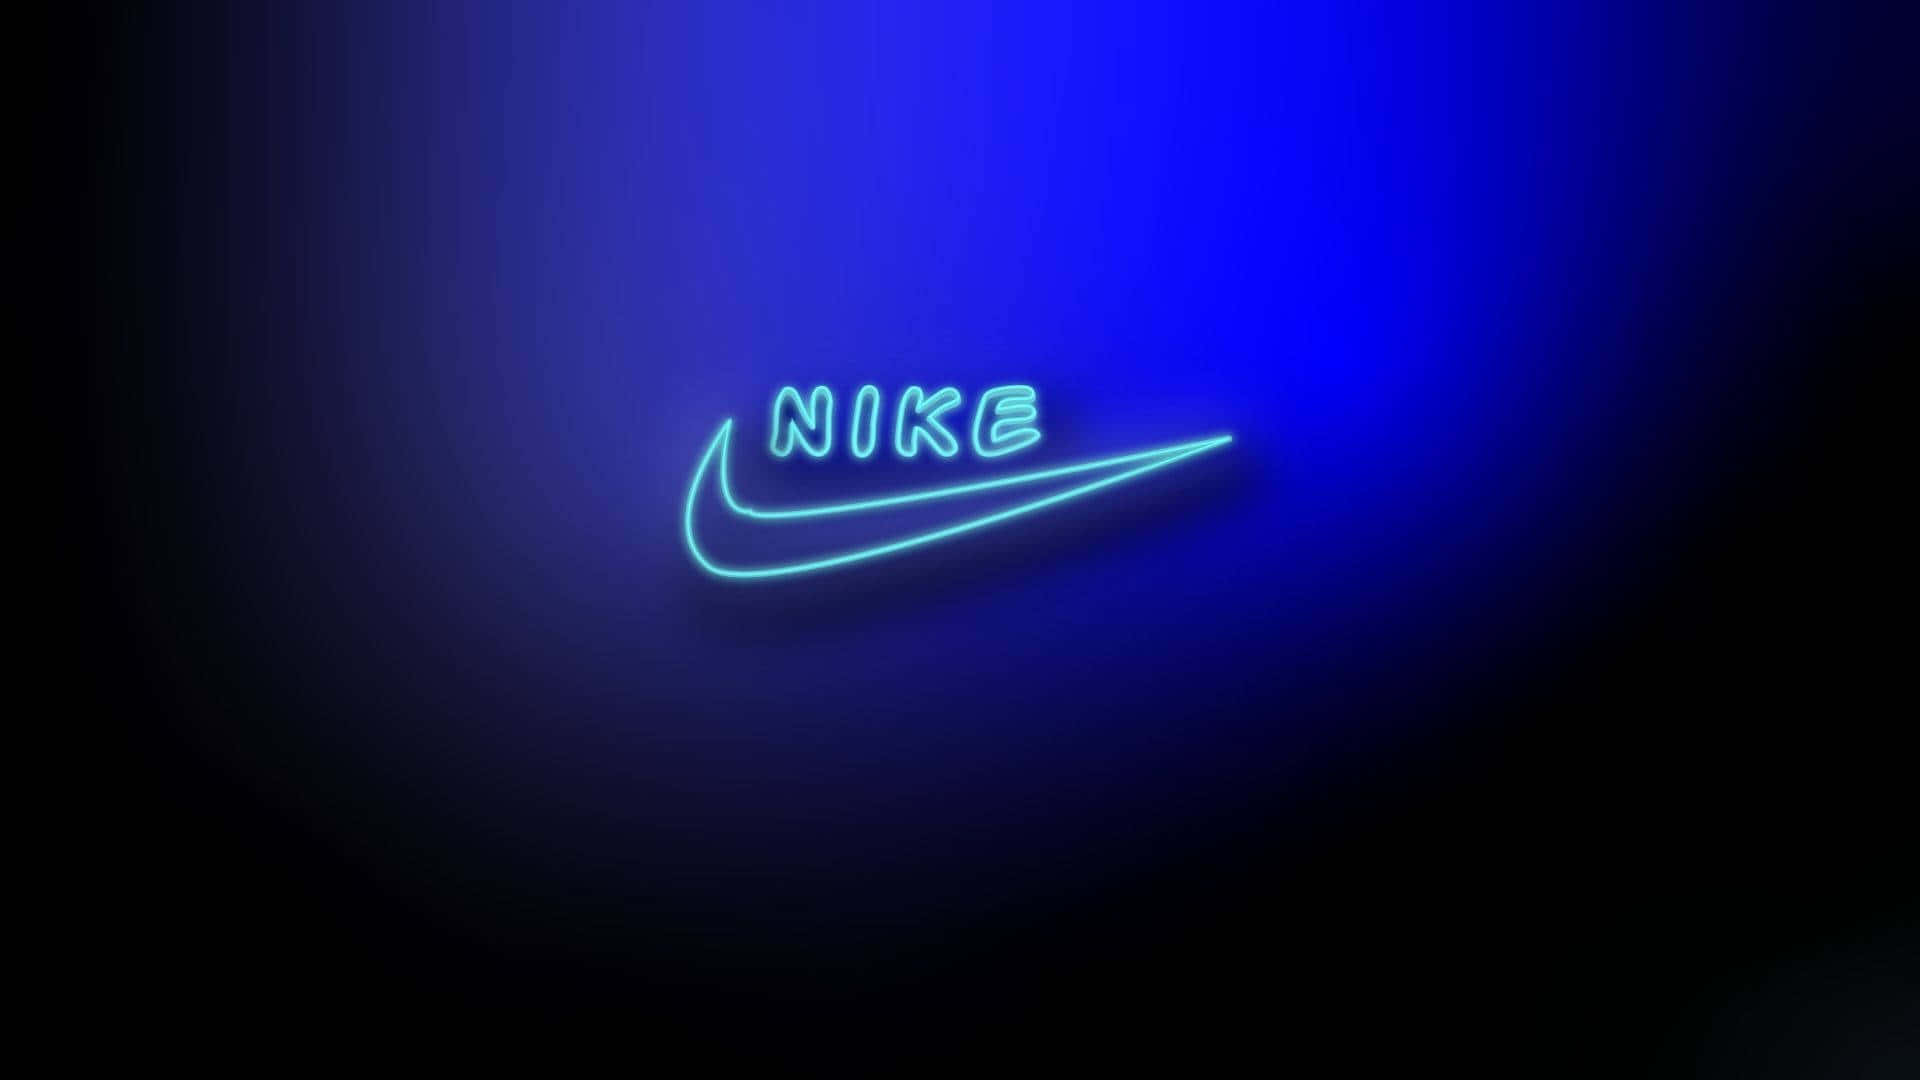 A blue LED light up in the dark Wallpaper